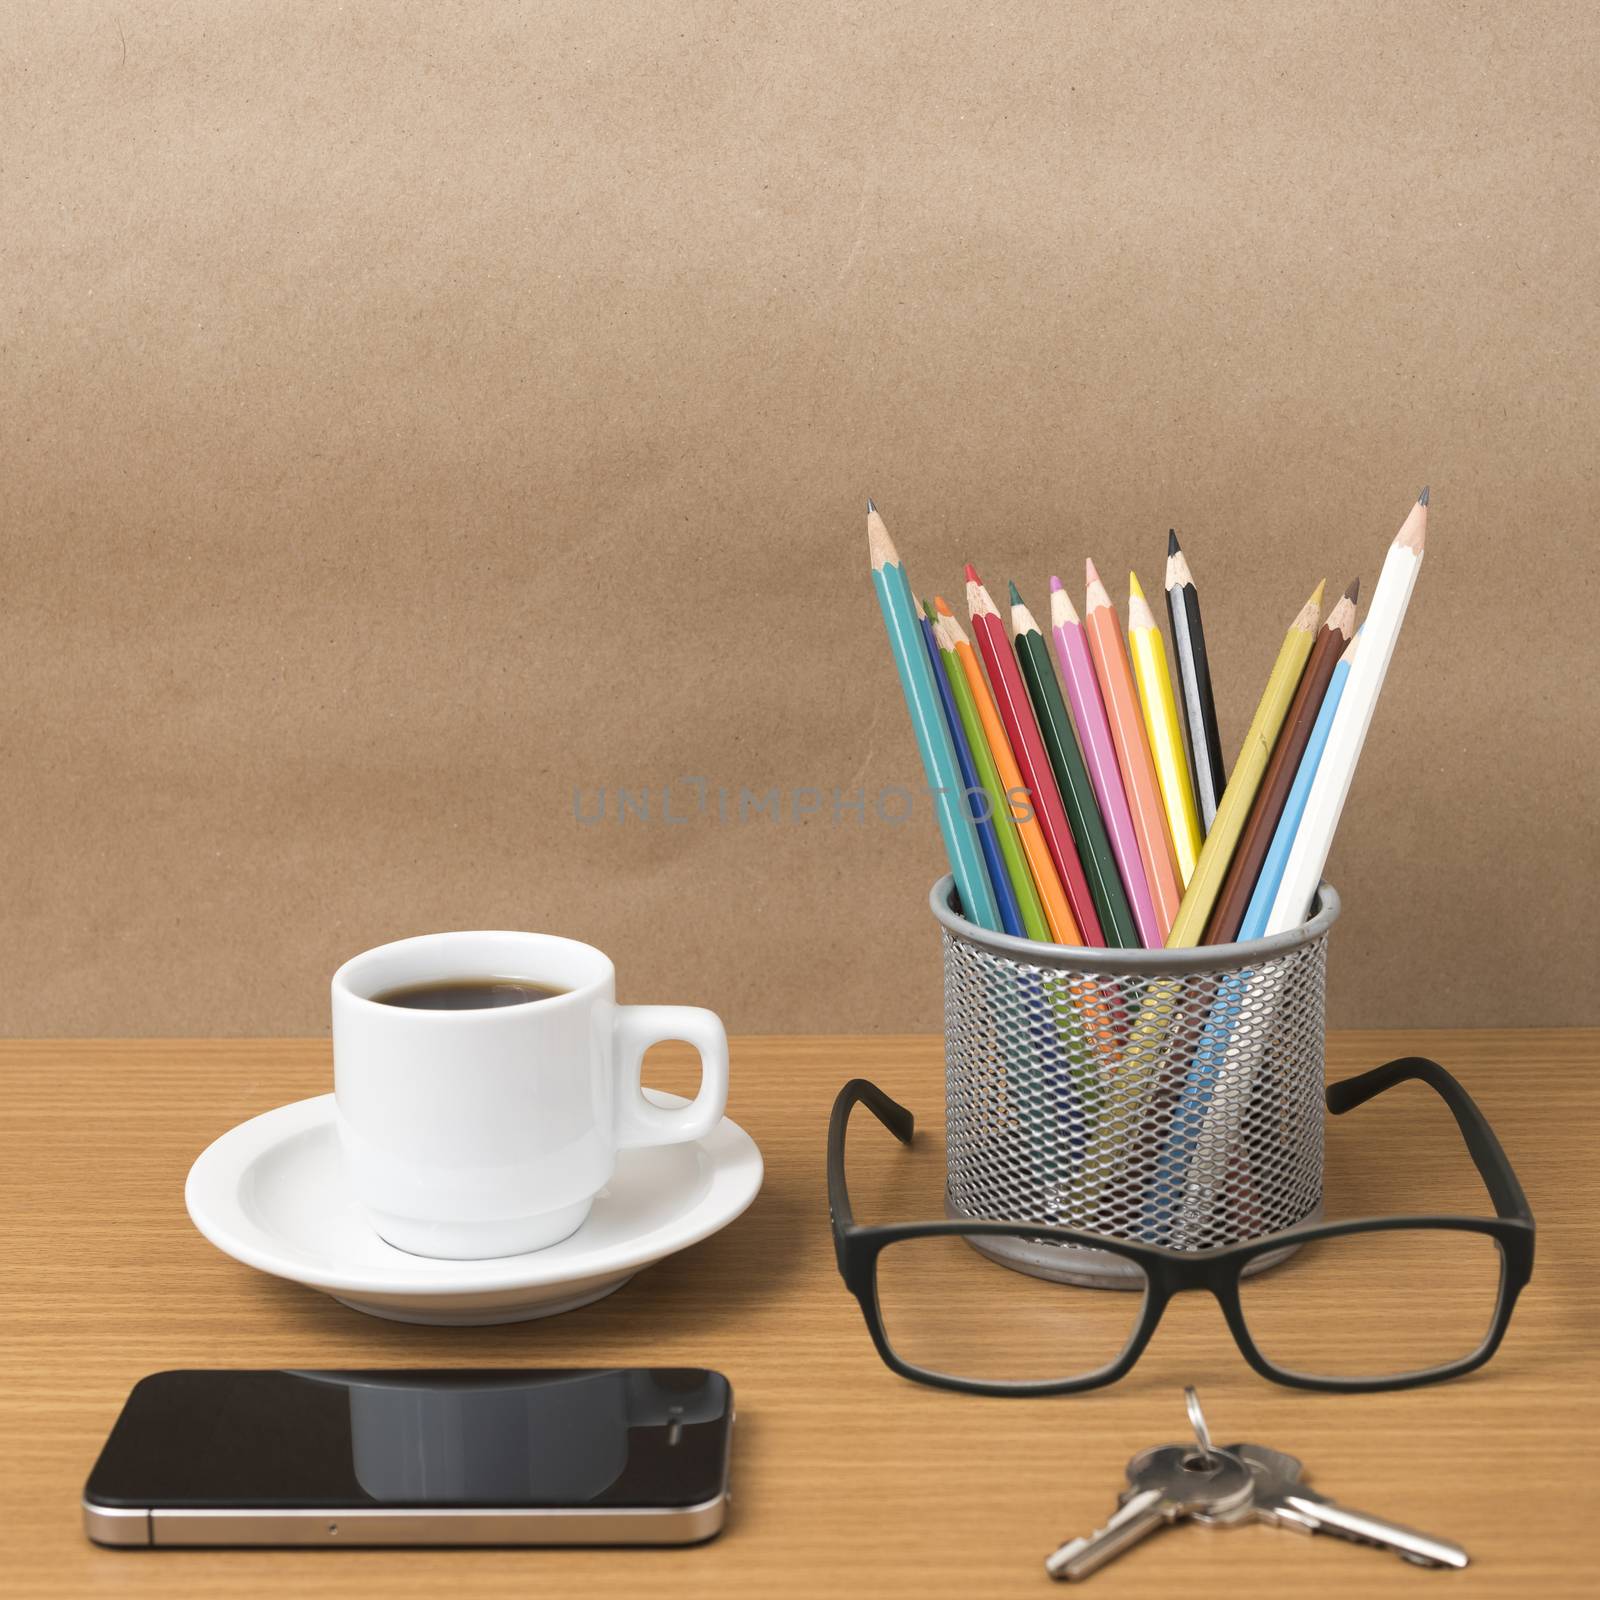 coffee,phone,eyeglasses,color pencil and key on wood table background